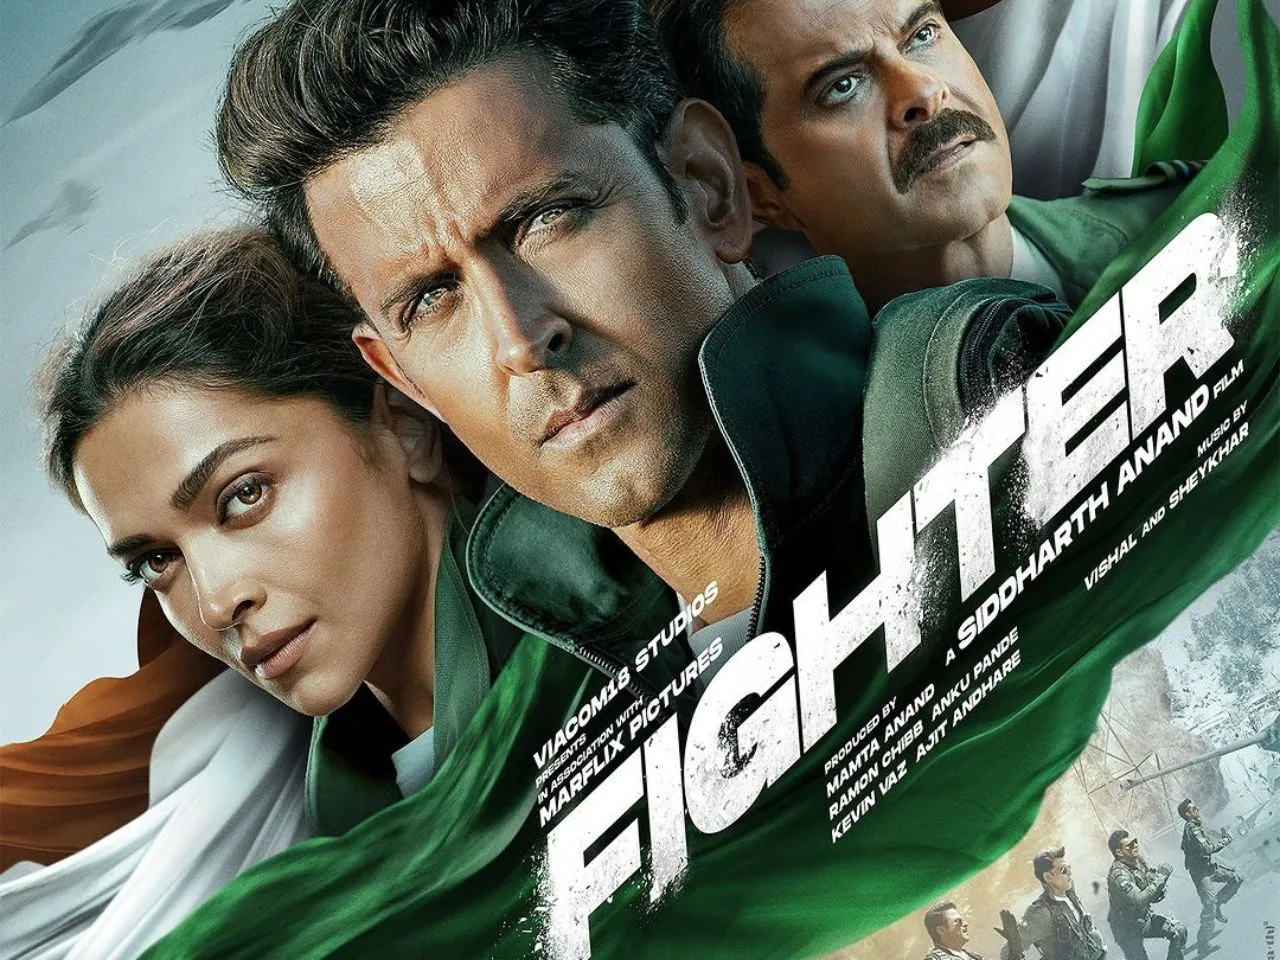 Fighter janta review